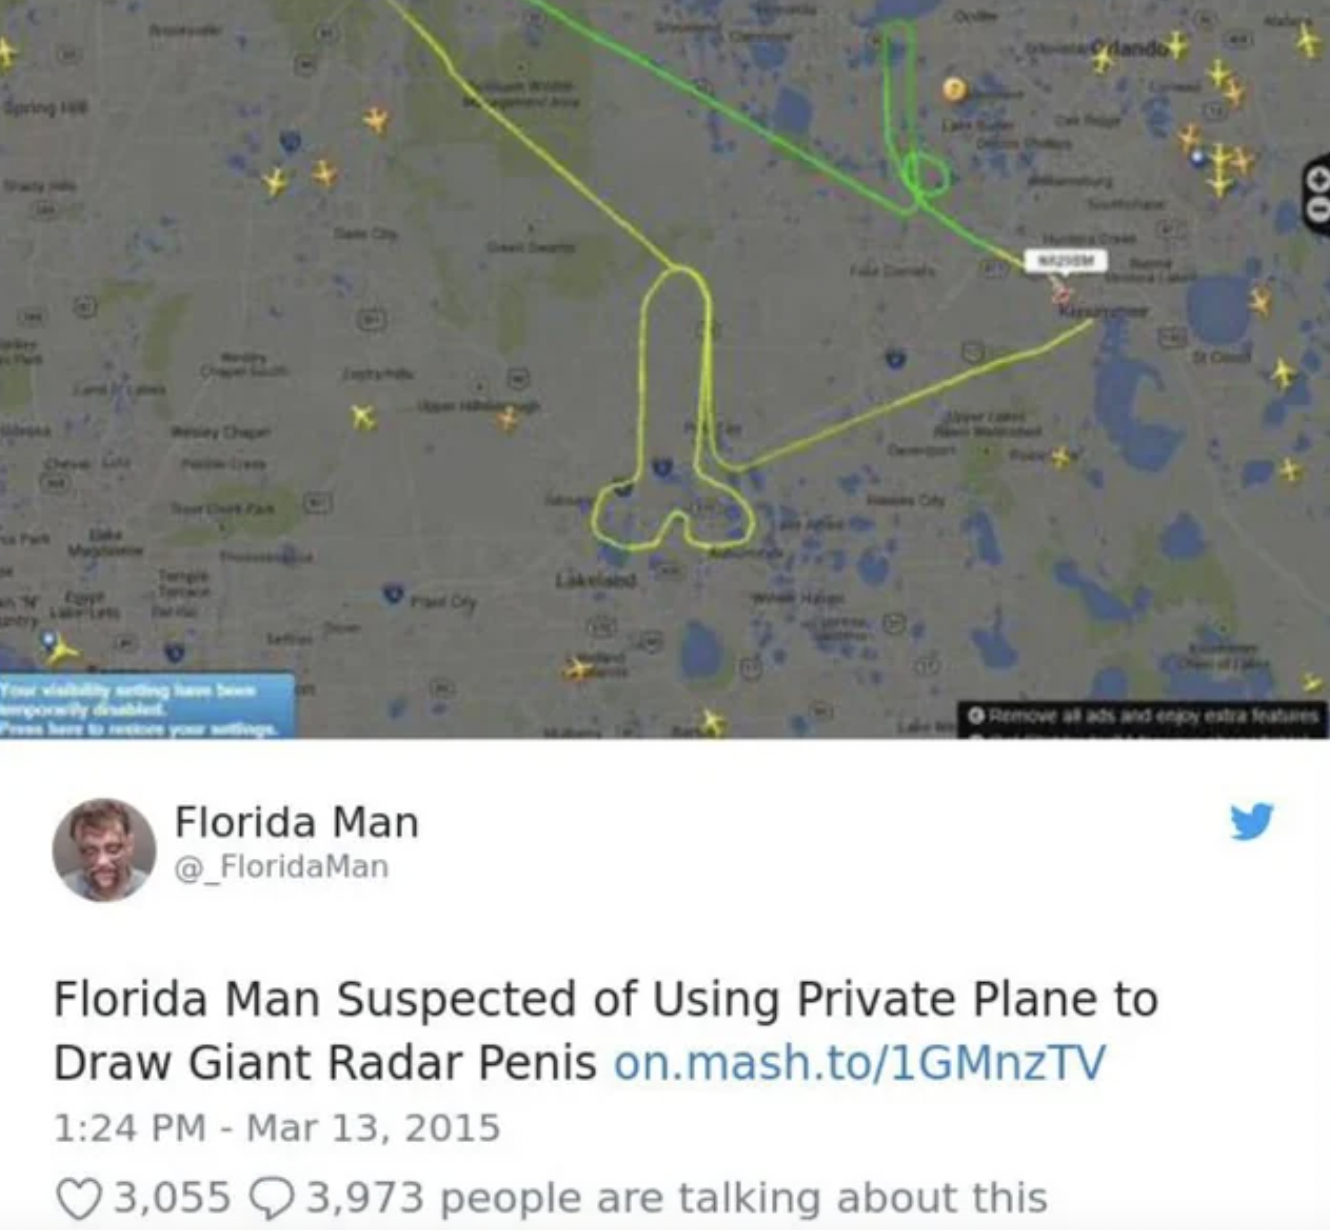 florida man radar  - Florida Man temor at ads and egy estreatures Florida Man Suspected of Using Private Plane to Draw Giant Radar  on.mash.to1GMnzTV 3,055 3,